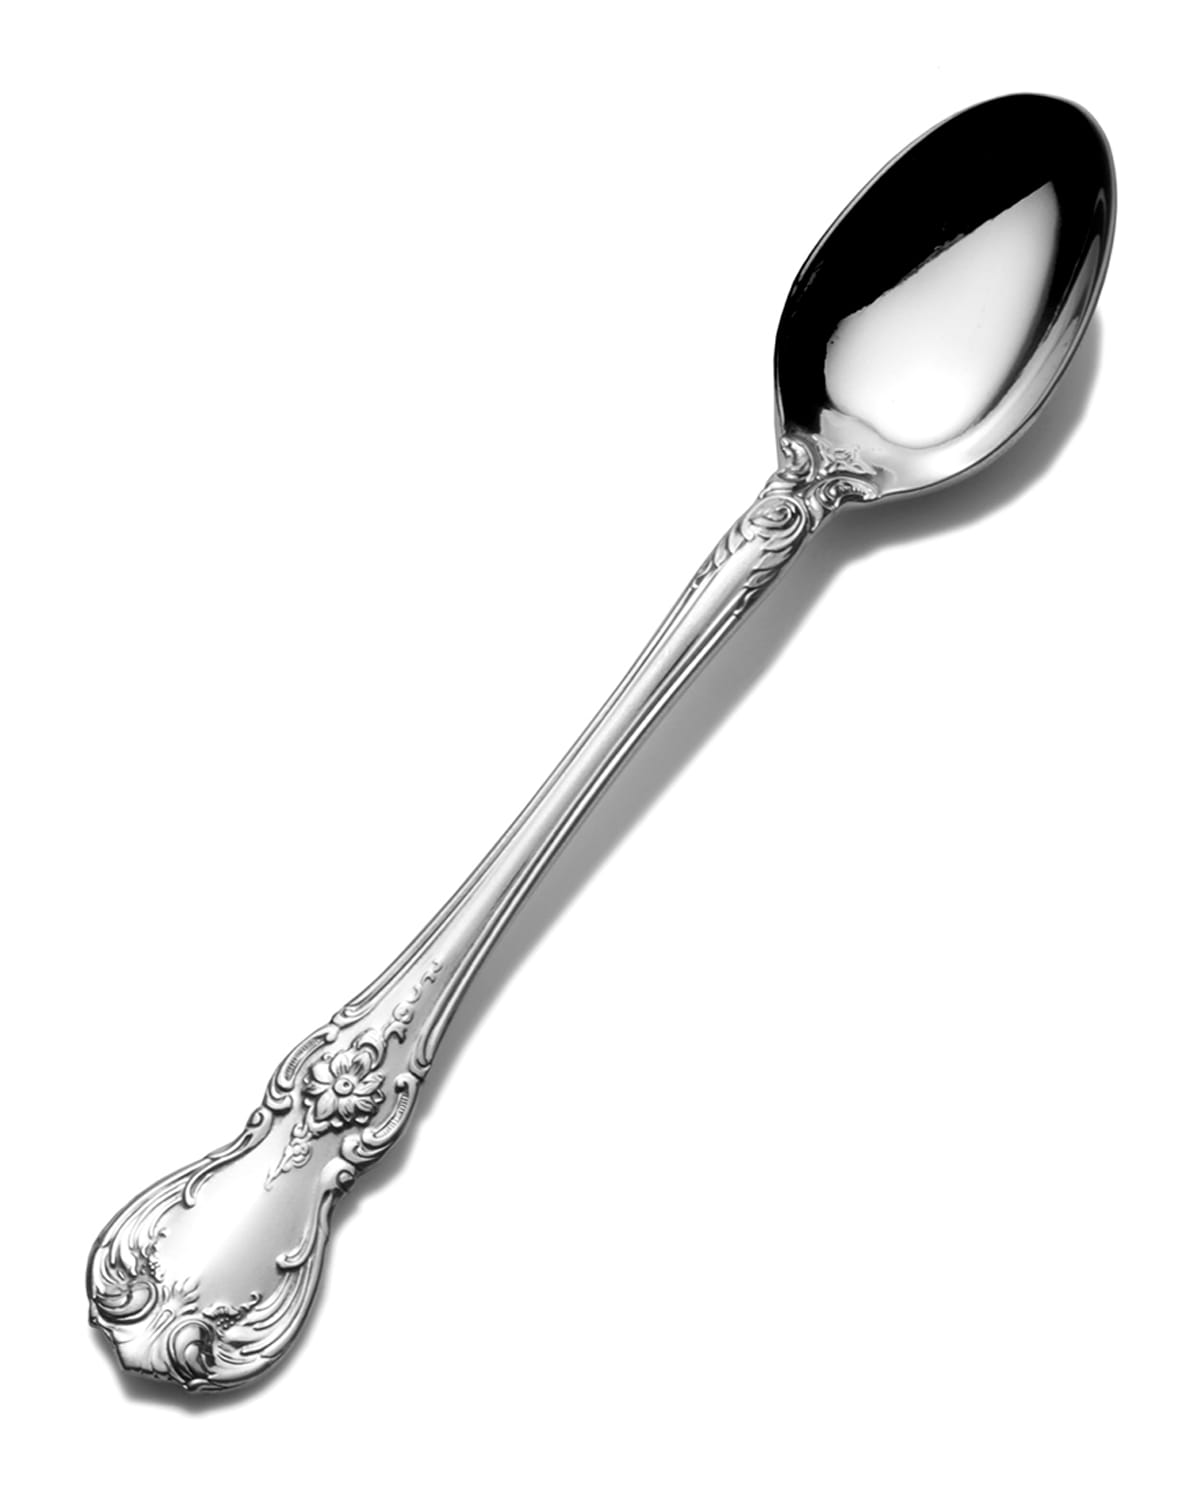 Shop Towle Silversmiths Old Master Infant Feeding Spoon In Silver